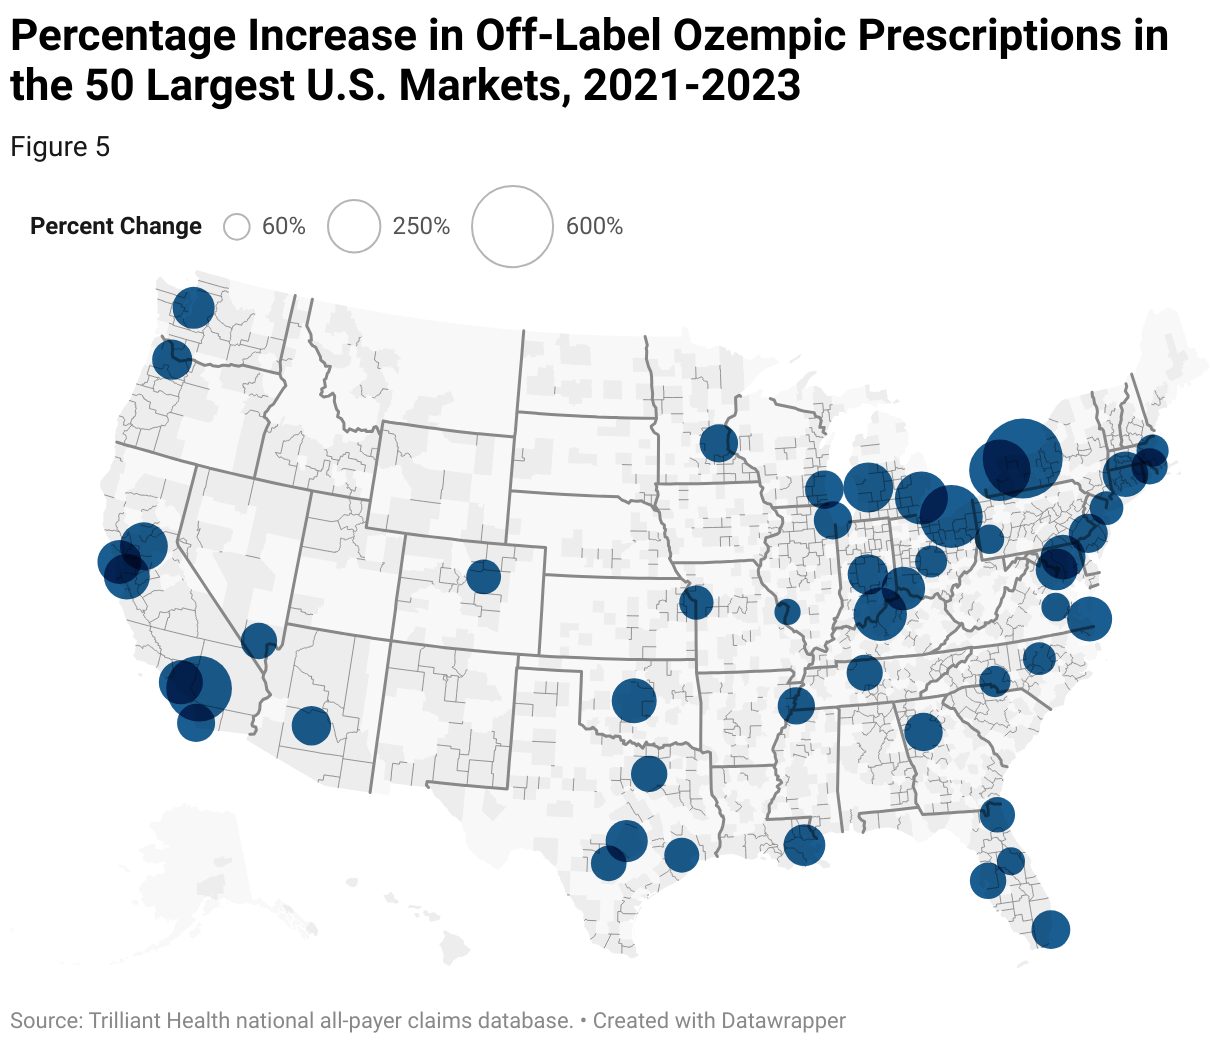 A map shows the percent increase of off-label Ozempic prescriptions across 50 U.S. markets. Uptake varies across markets, led by Rochester, NY with more than 500% increase in prescriptions from 2021 to 2023. 